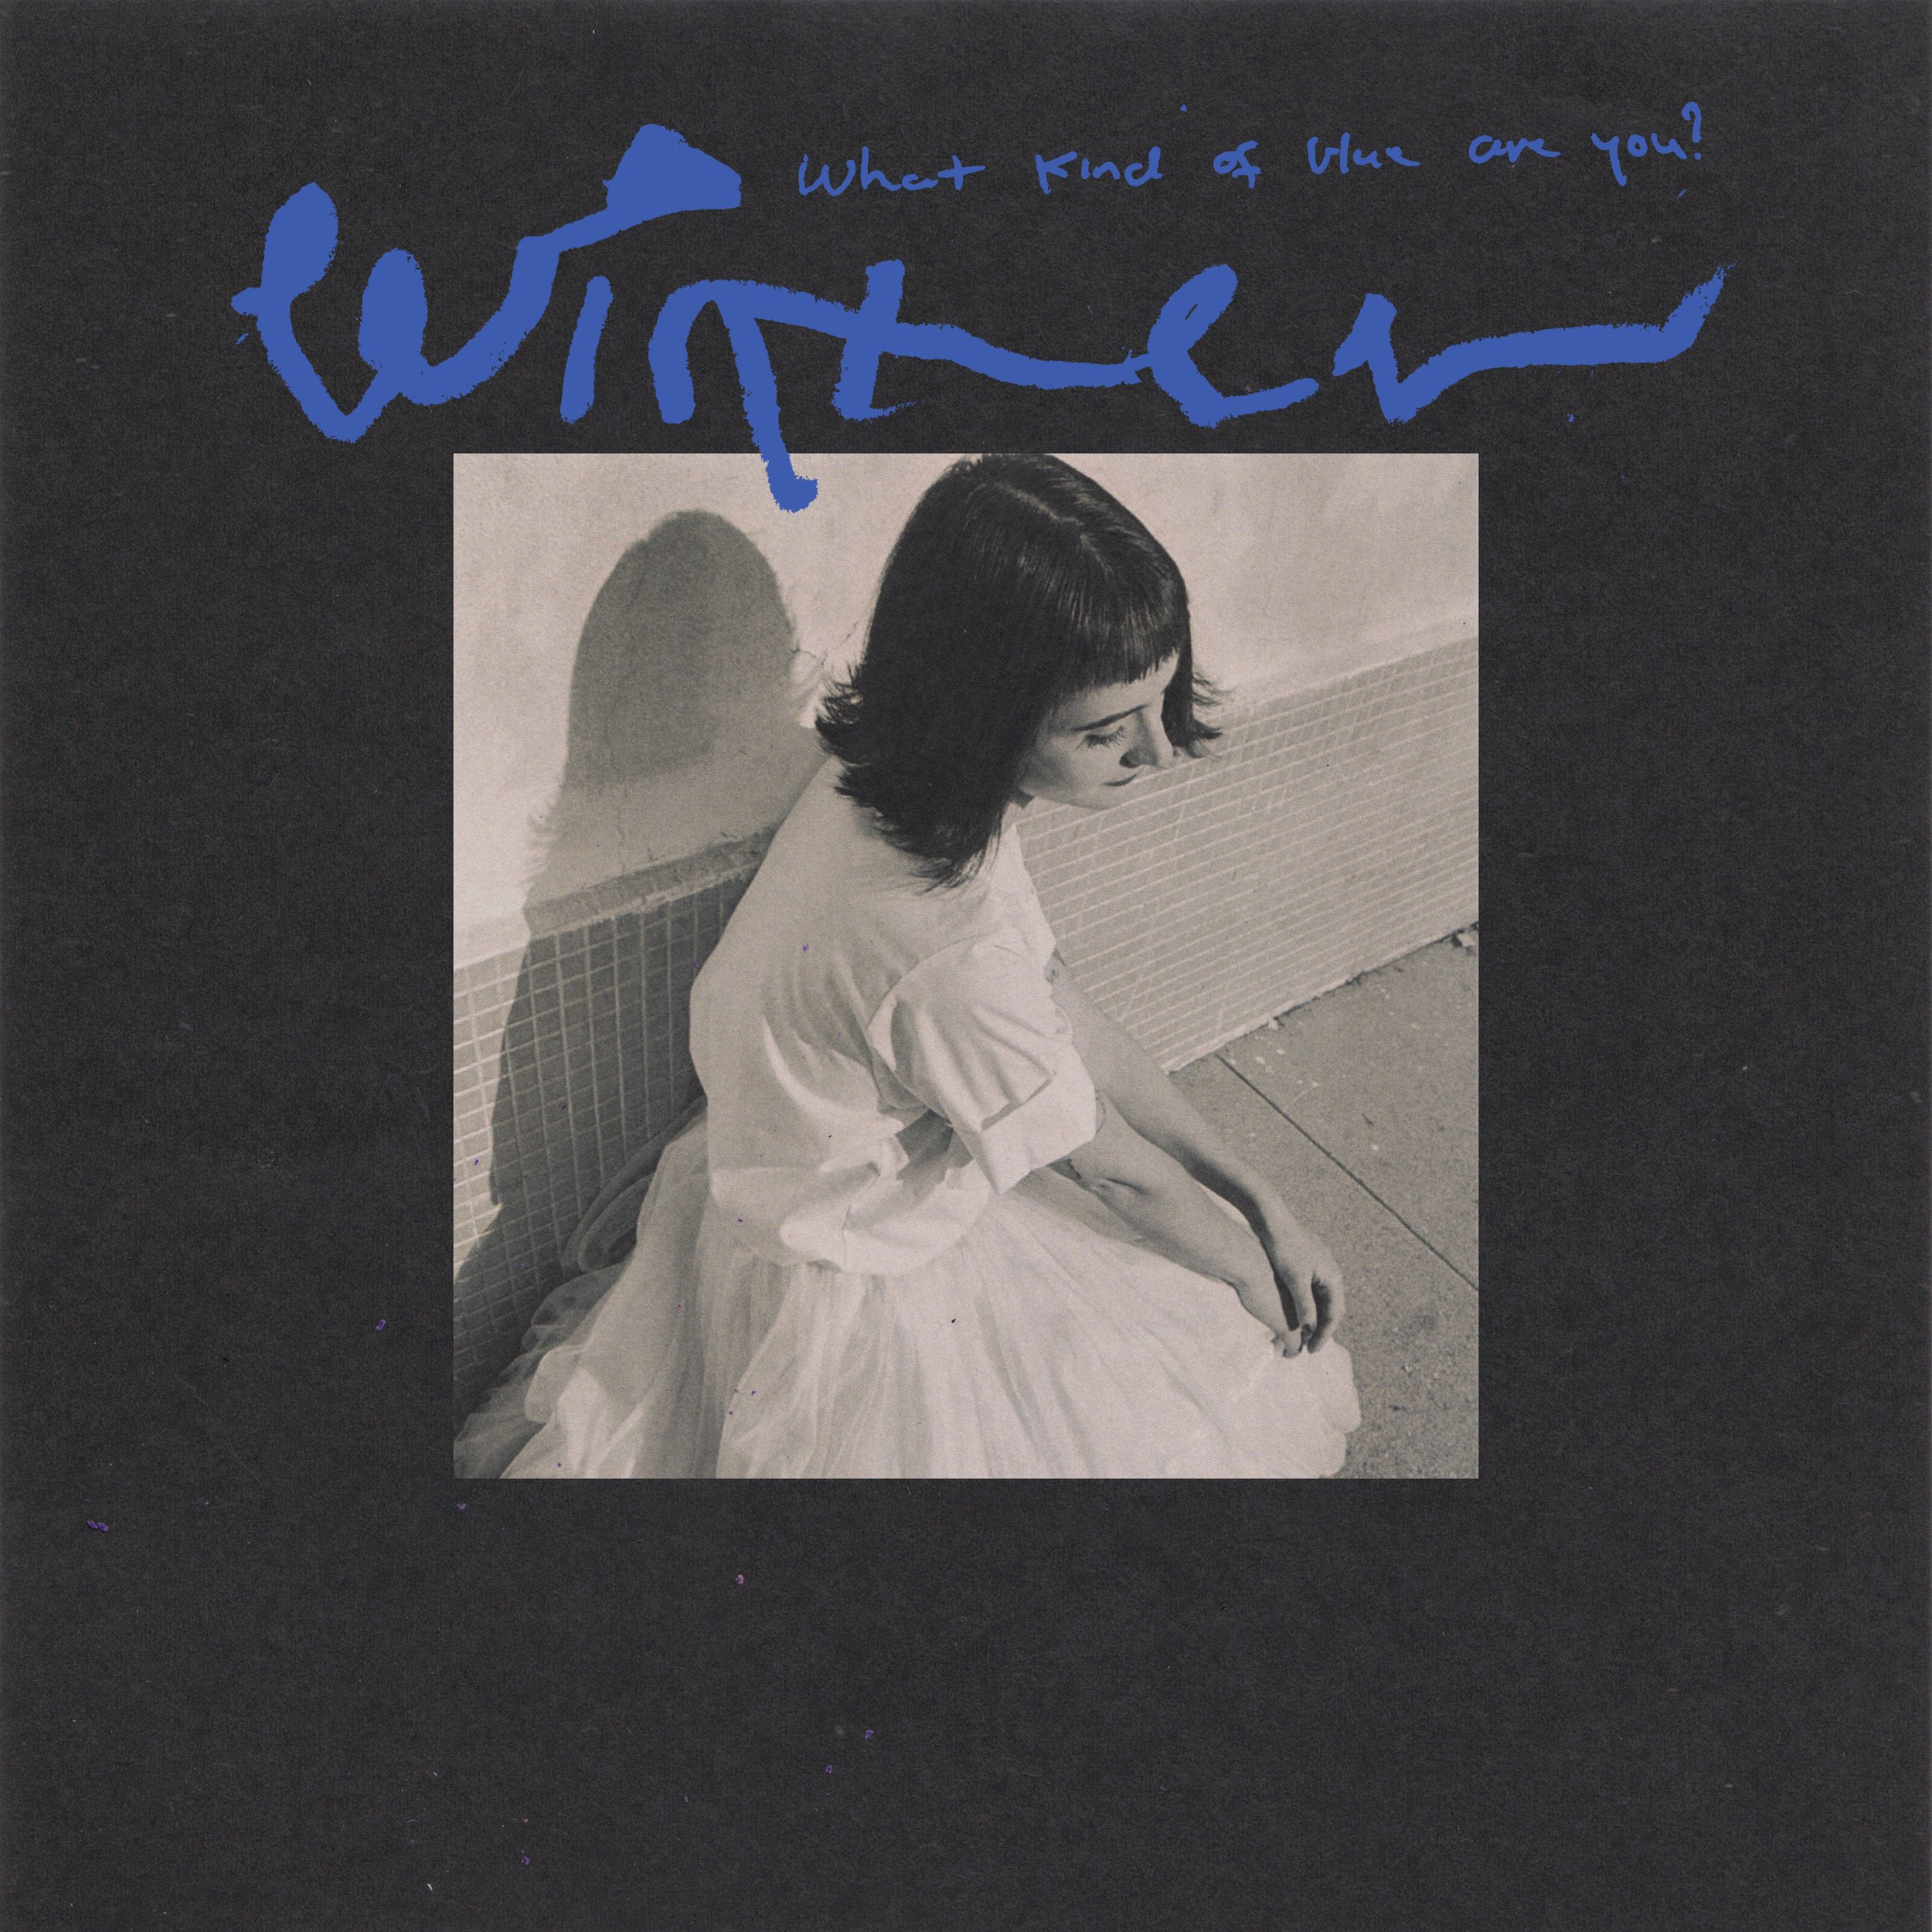 New album "What Kind of Blue Are You" by Winter